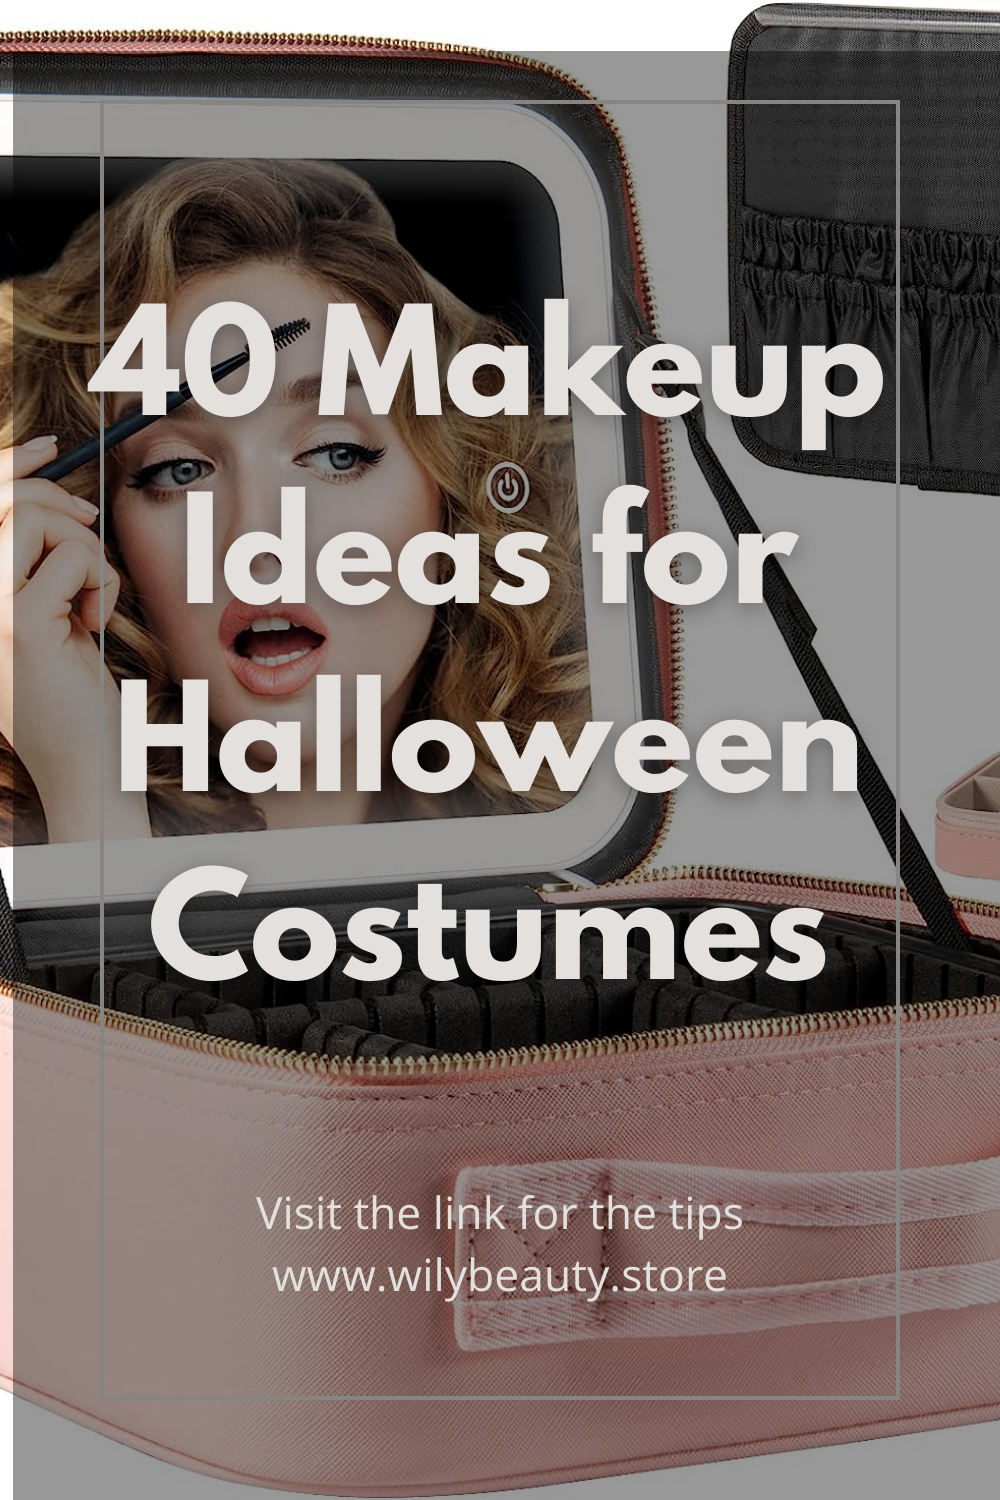 40 Makeup Ideas for Halloween Costumes